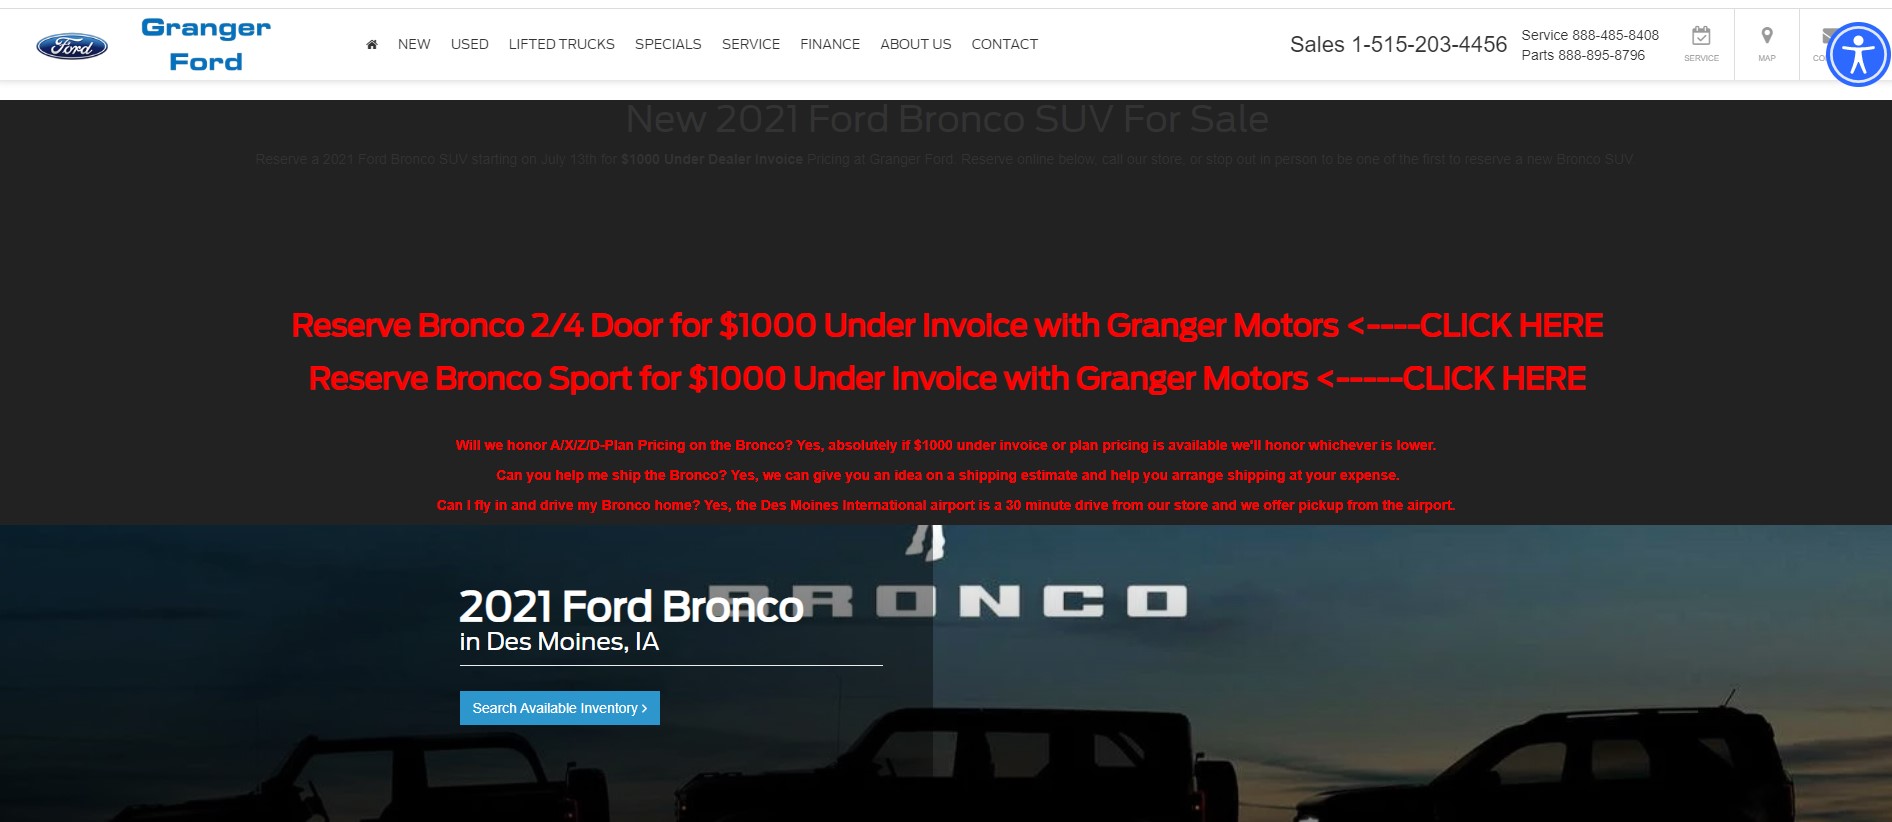 Ford Bronco Bronco Dealers: No-ADM, X-Plans & Special Discounts Master List Granger_Ford_Bronco_Pricing_071820